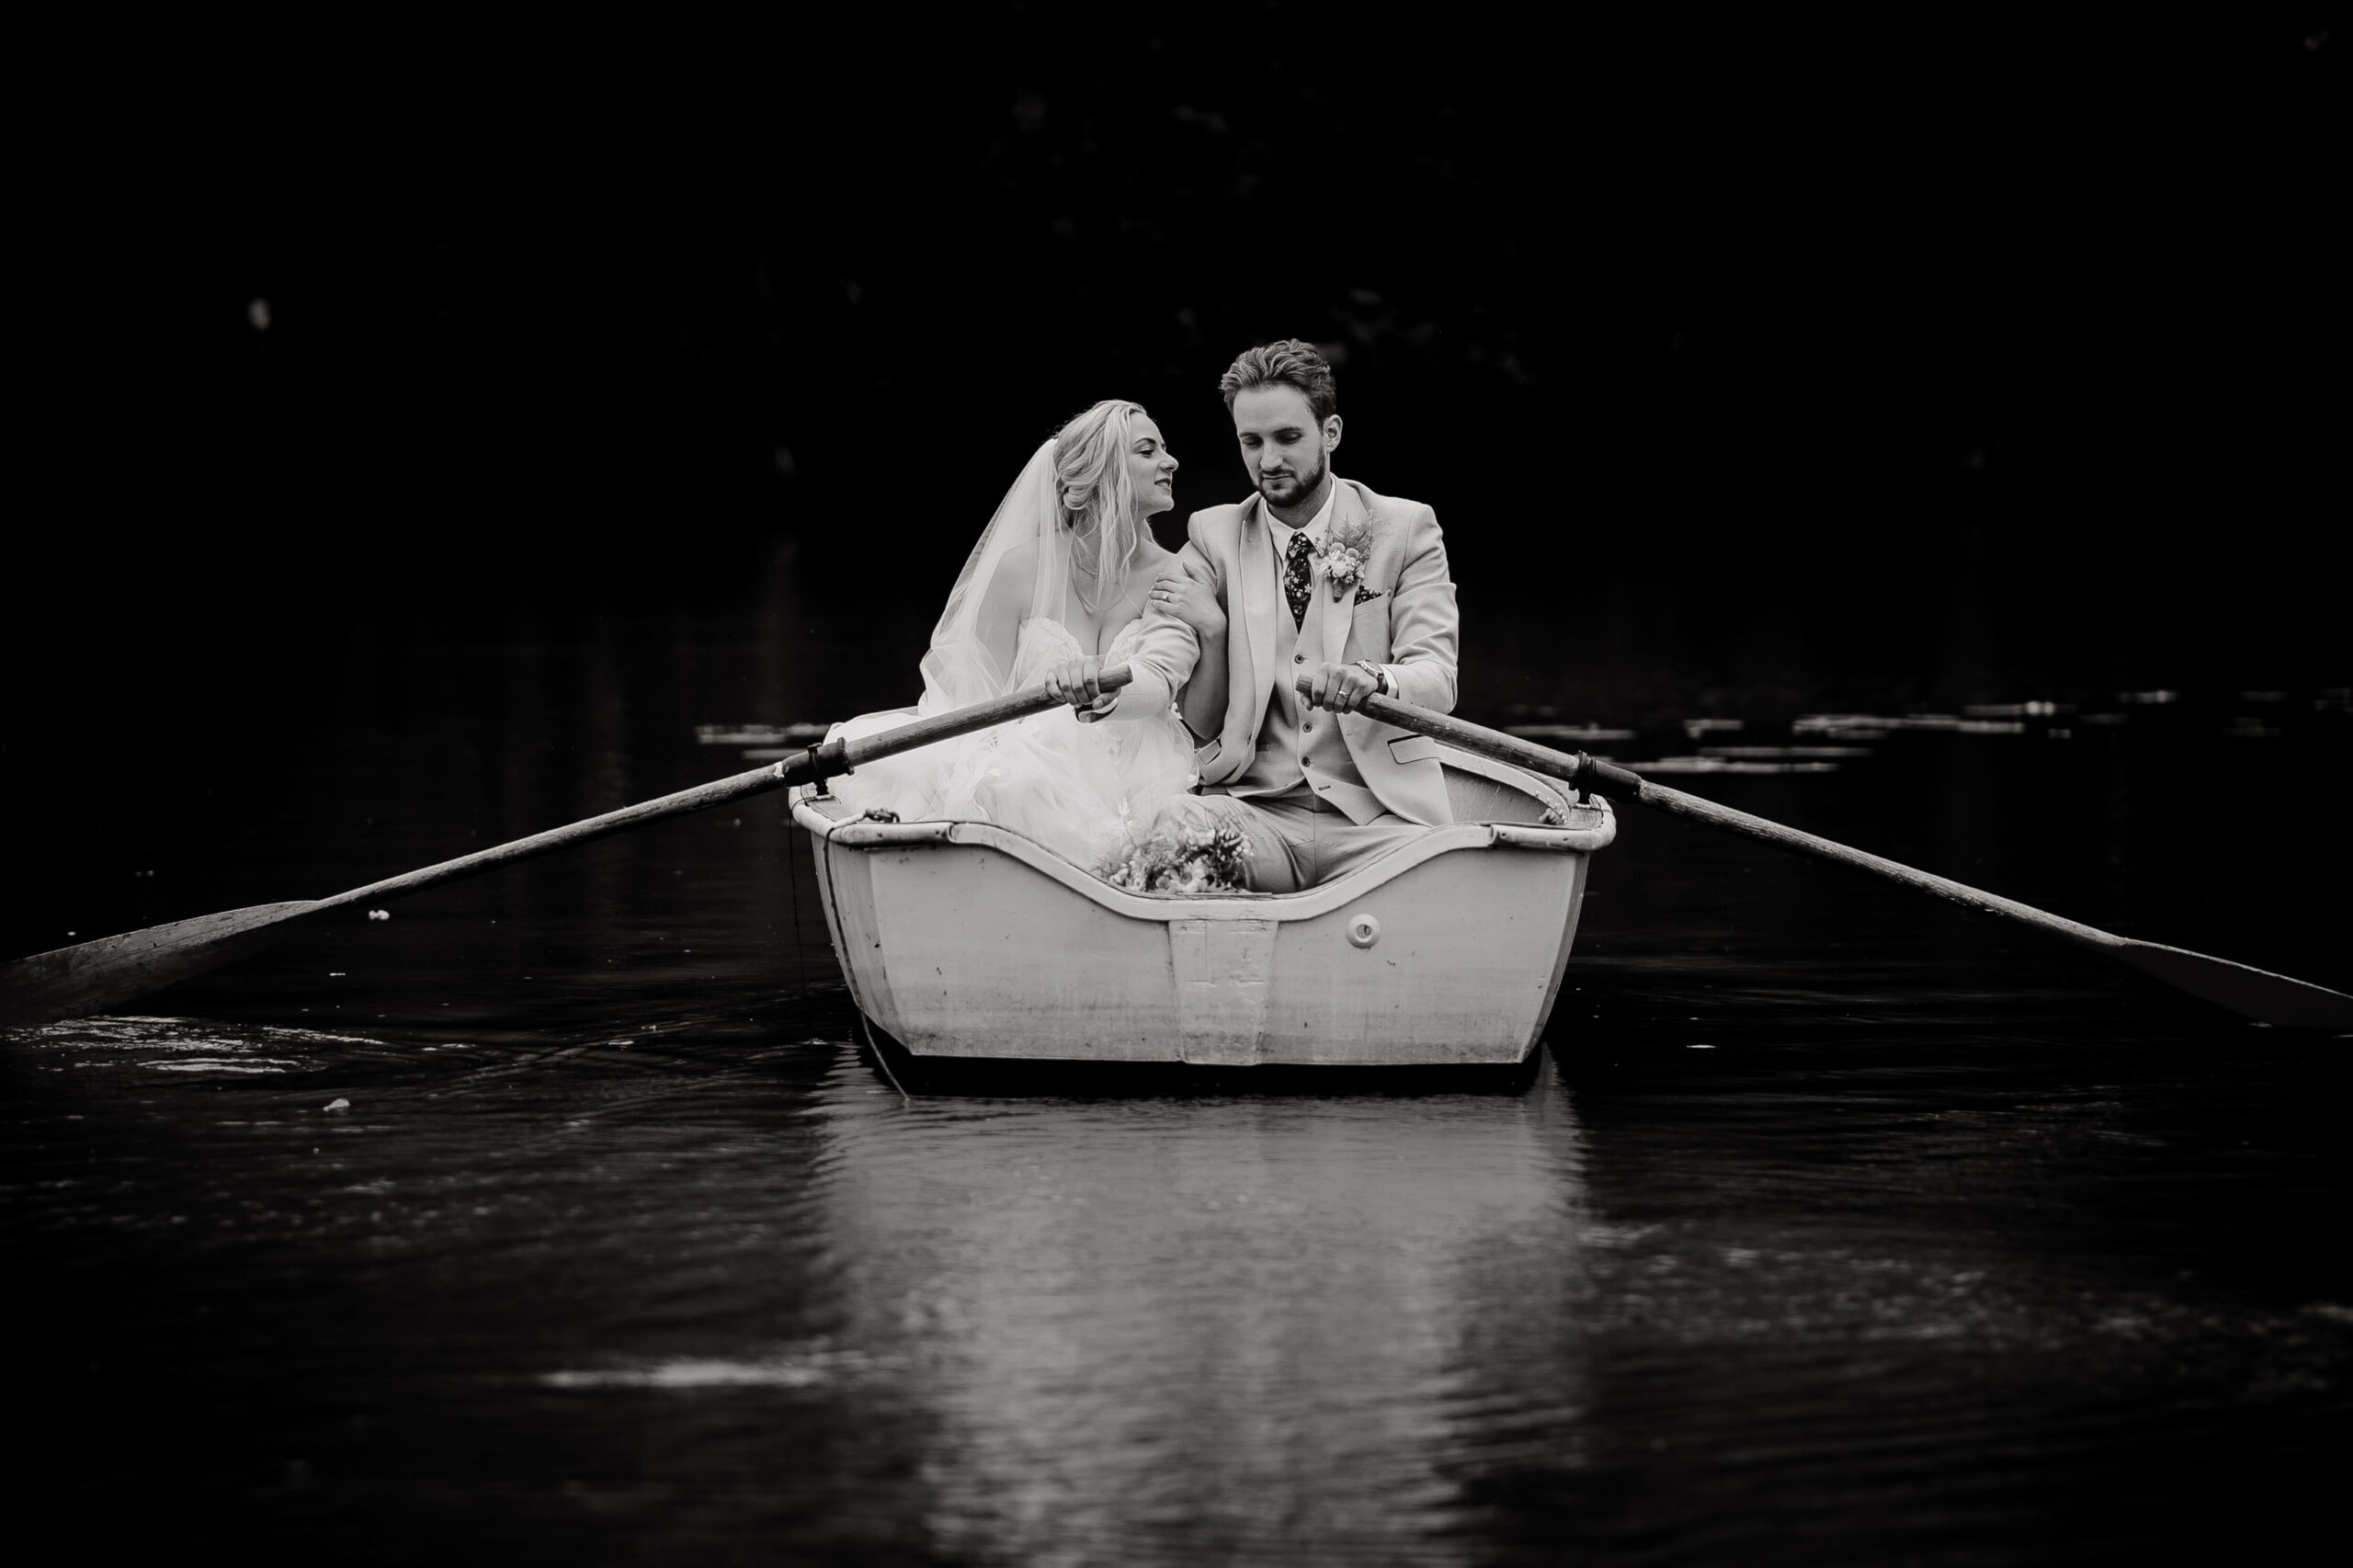 Bride and Groom rowing a boat at their Essex wedding. Essex wedding photographer.